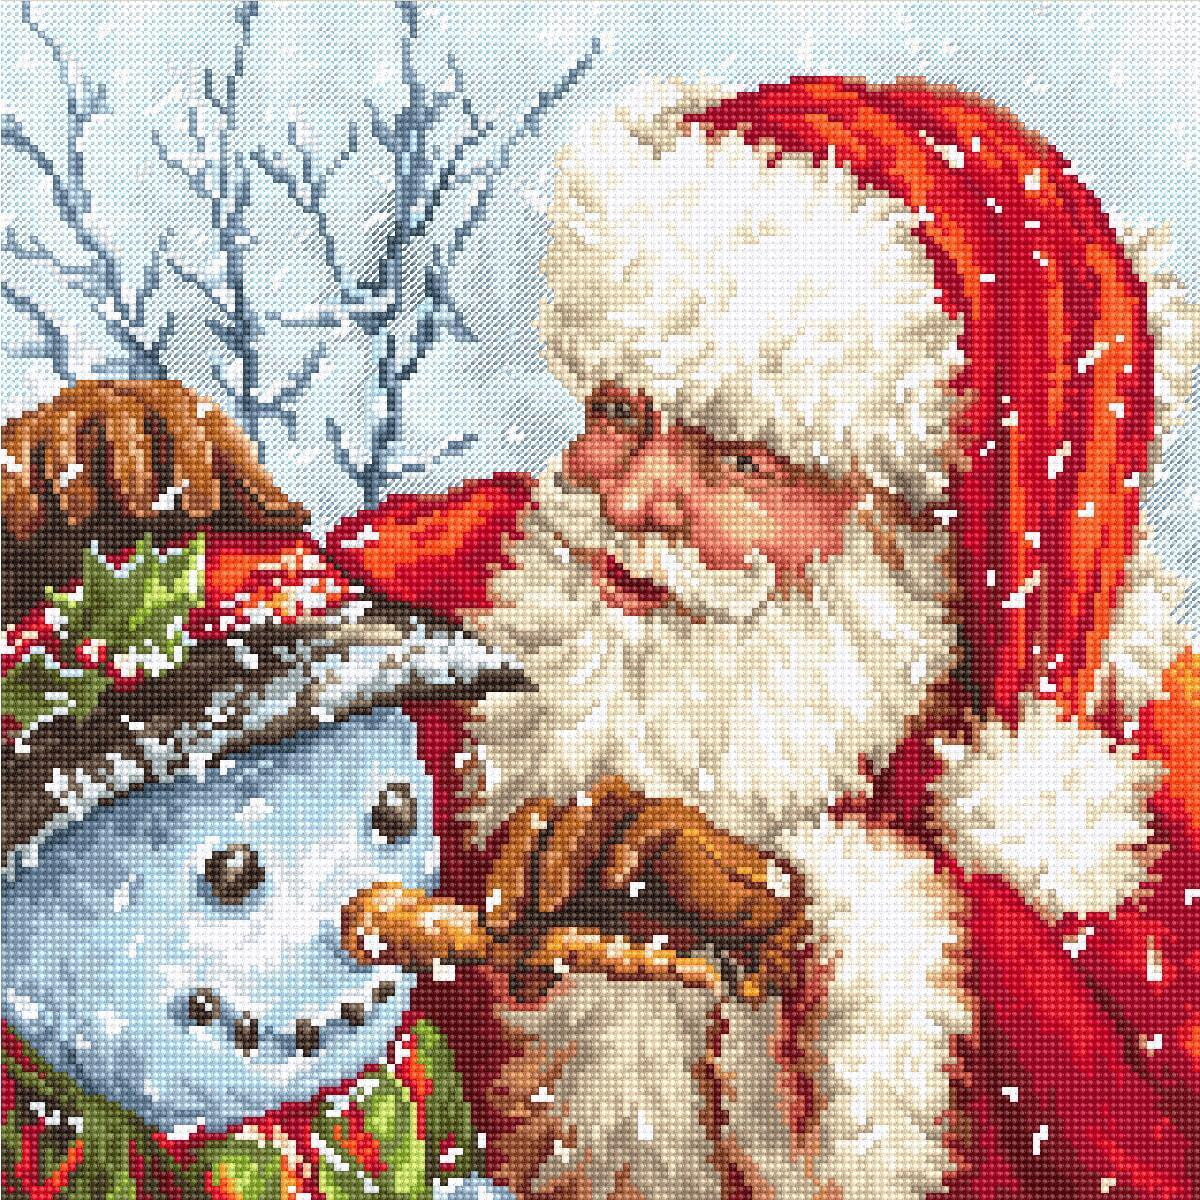 Letistitch counted cross stitch kit "SanatClaus and...